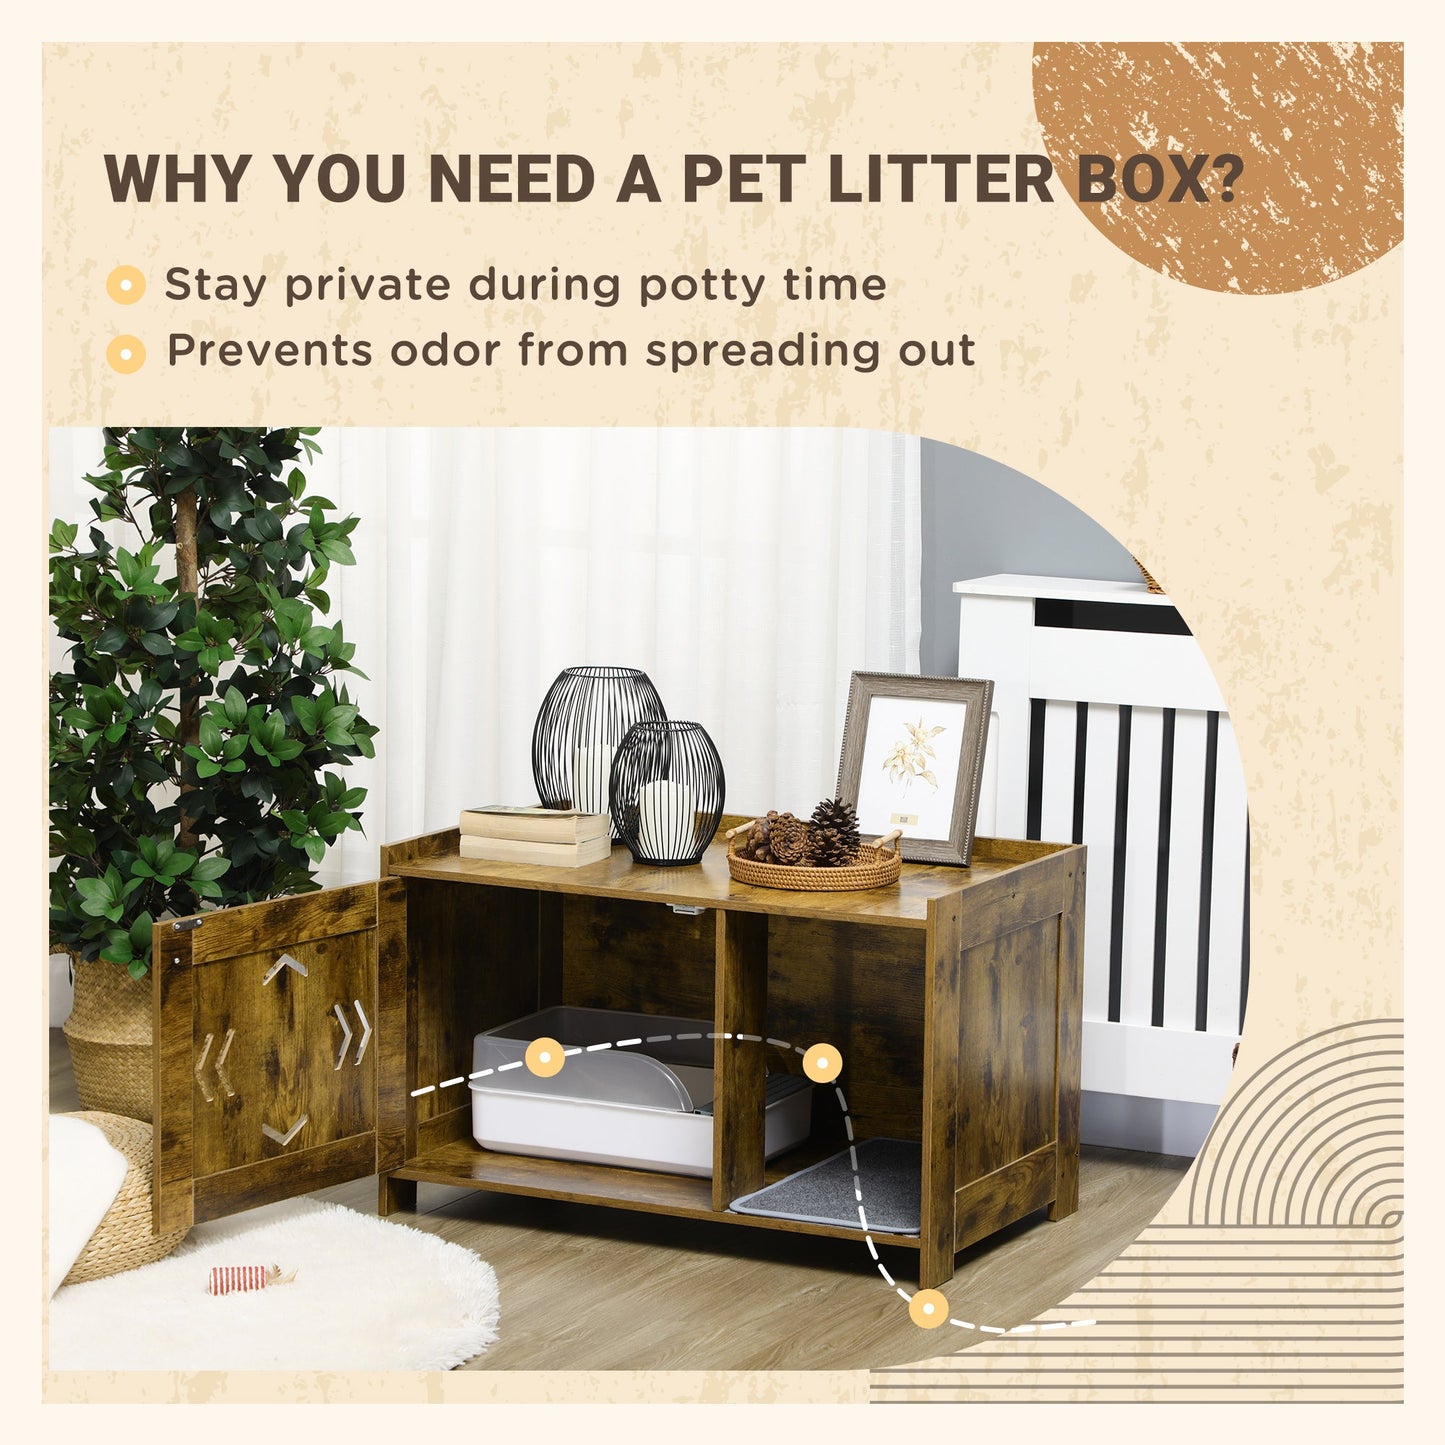 -PawHut Litter Box Enclosure, Industrial Cat Litter Box Furniture with Door and Scratching Pad, Cat Washroom Storage Bench for Living Room, Bedroom - Outdoor Style Company